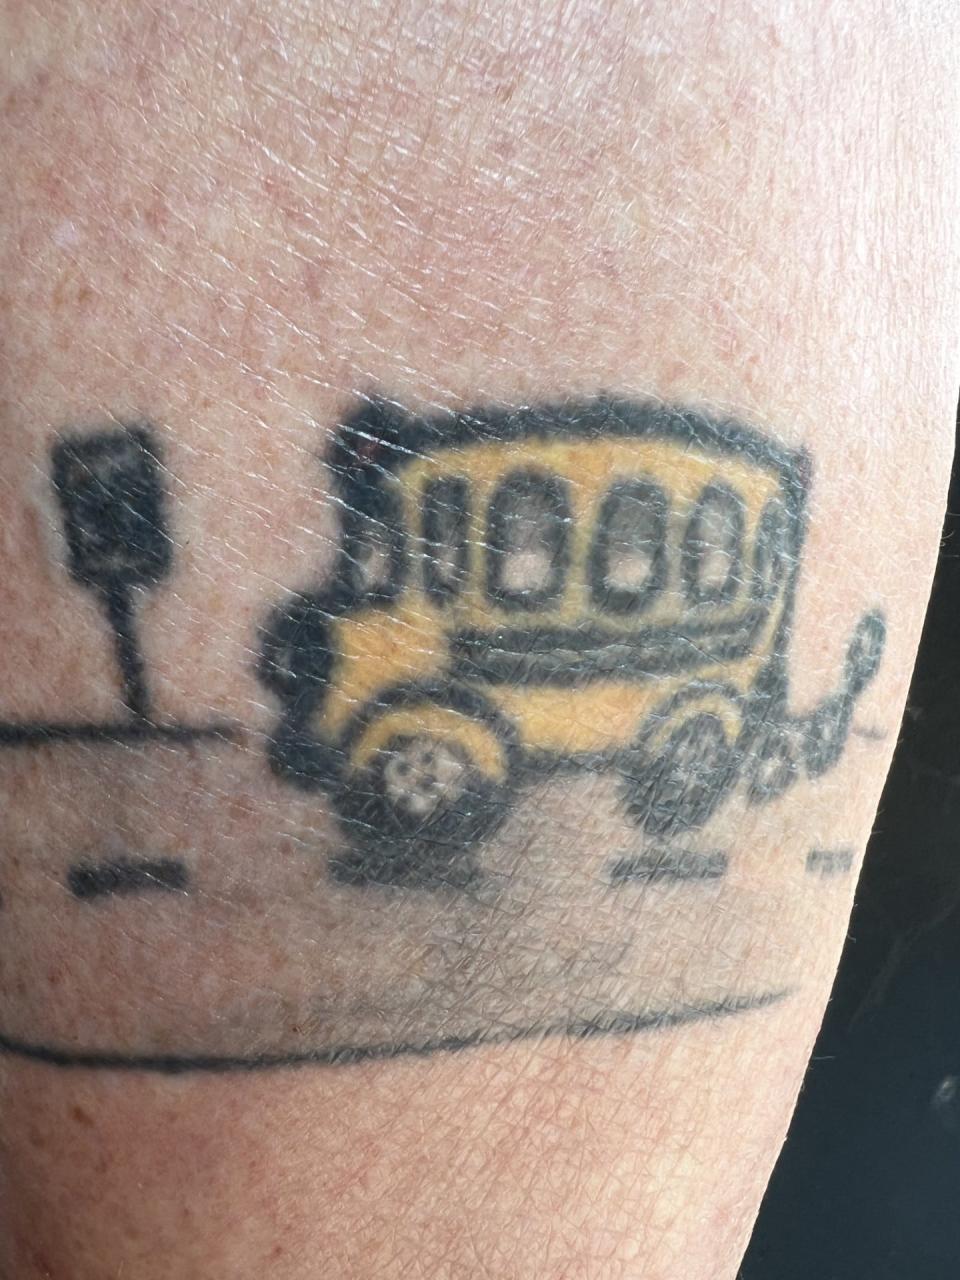 One part of Sherry Mytko's tattoo shows a small yellow bus nearing a 25-mph speed limit sign.